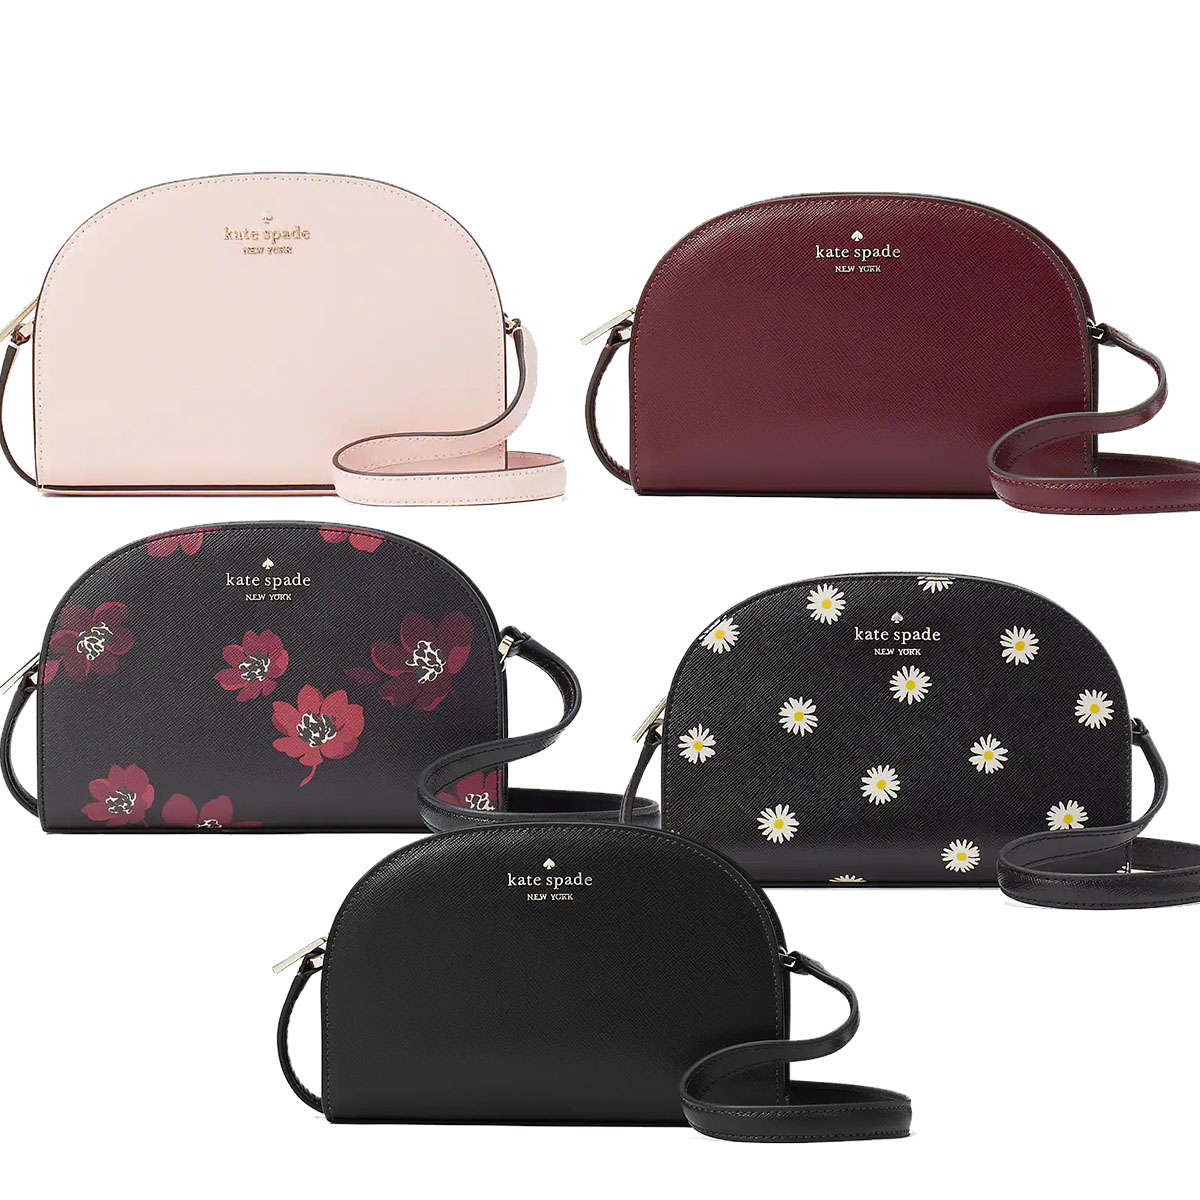 New Arrival! Kate Spade Perry Dome crossbody bag with 4 different colo, Crossbody Bag